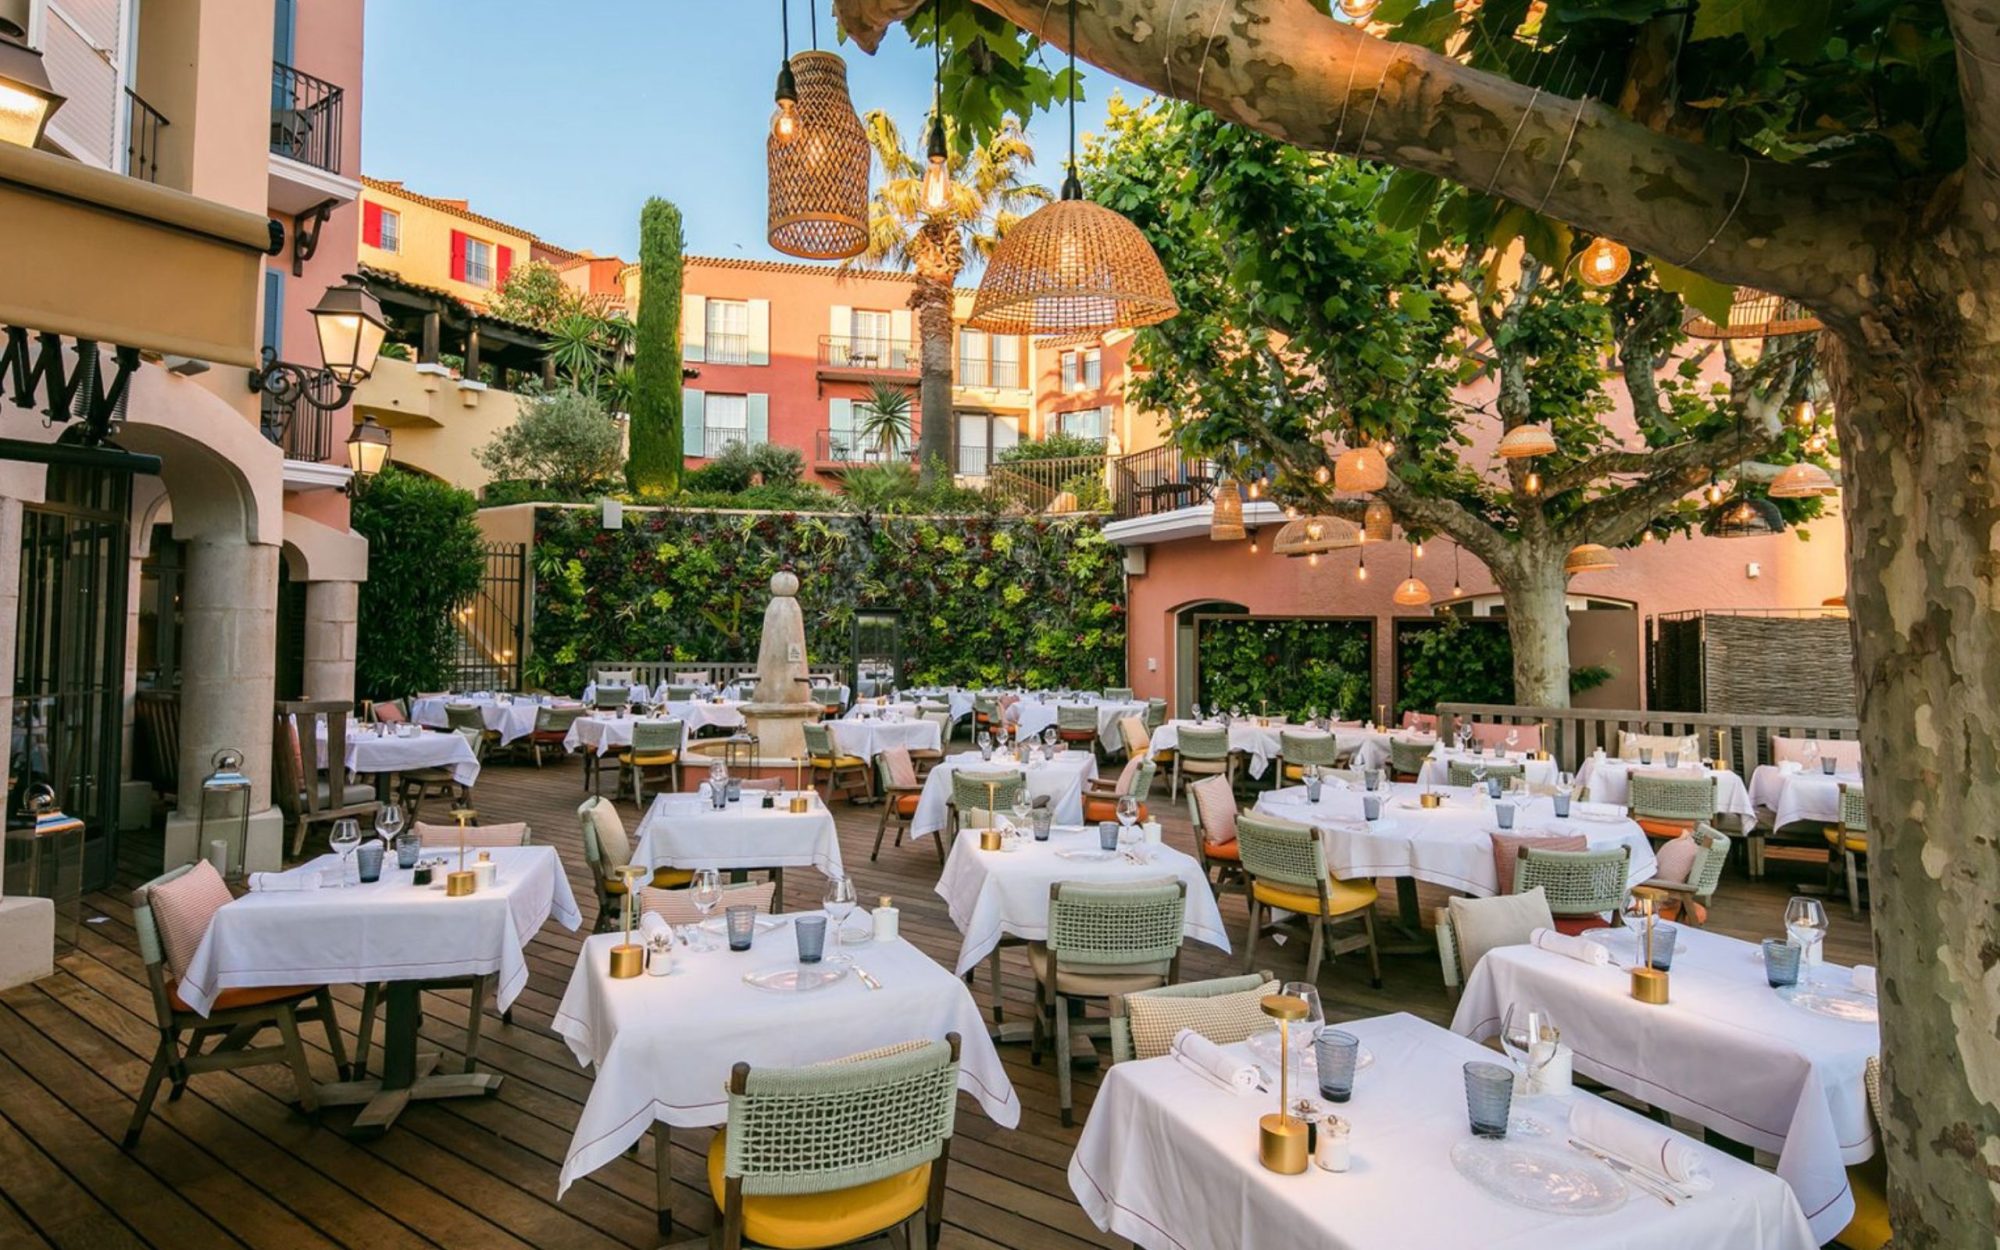 Hotel Byblos, Saint-Tropez: A destination where glamour and provencal charm converge in harmony